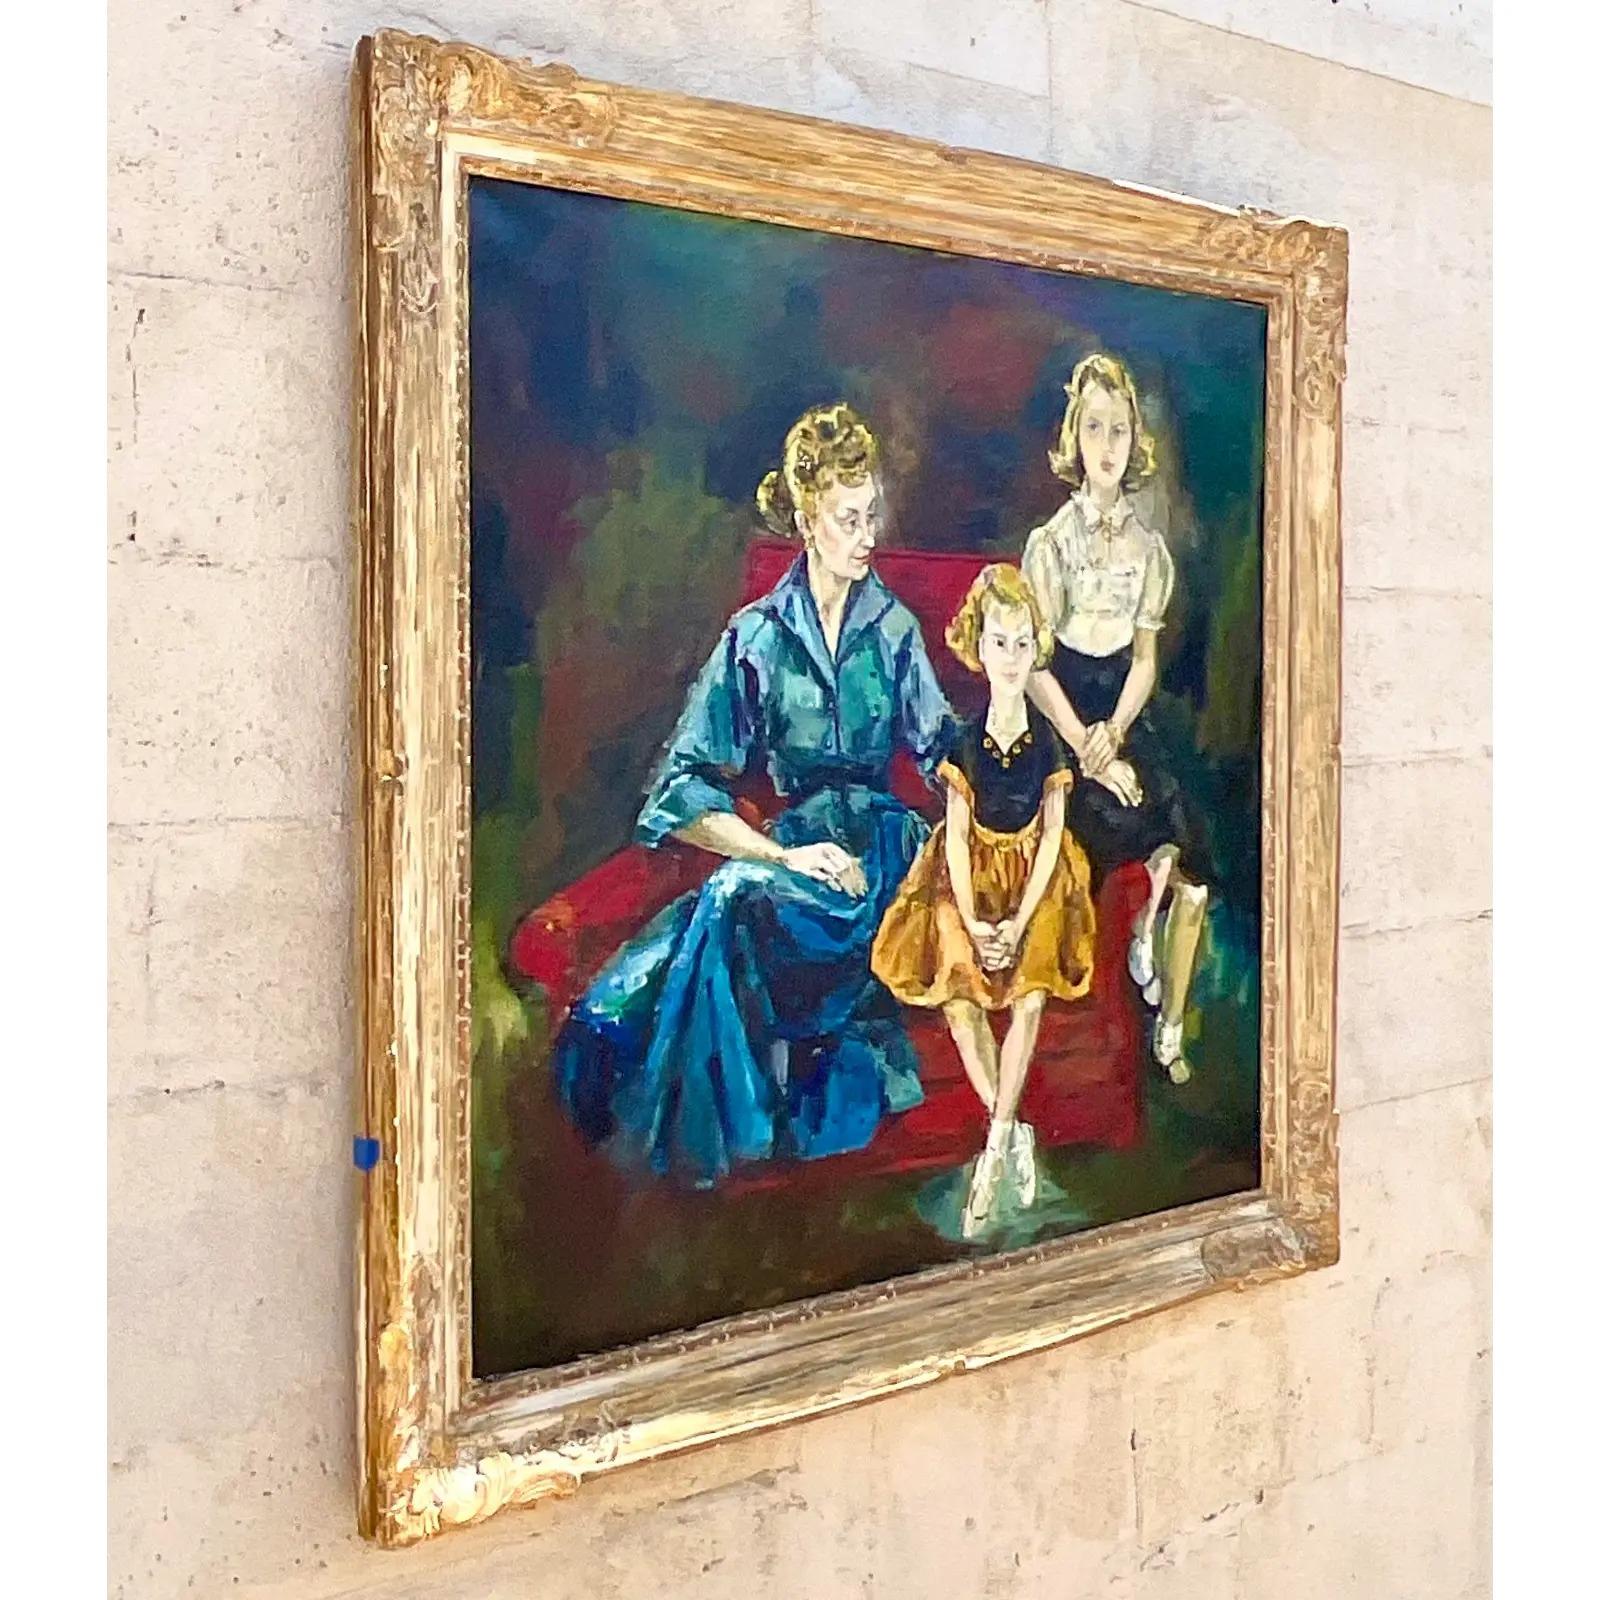 Fantastic vintage original oil portrait of women. Beautiful rich color dominates this canvas composition of a family of three women. Gorgeous carved frame. Signed by the artist. Acquired from a Miami estate.